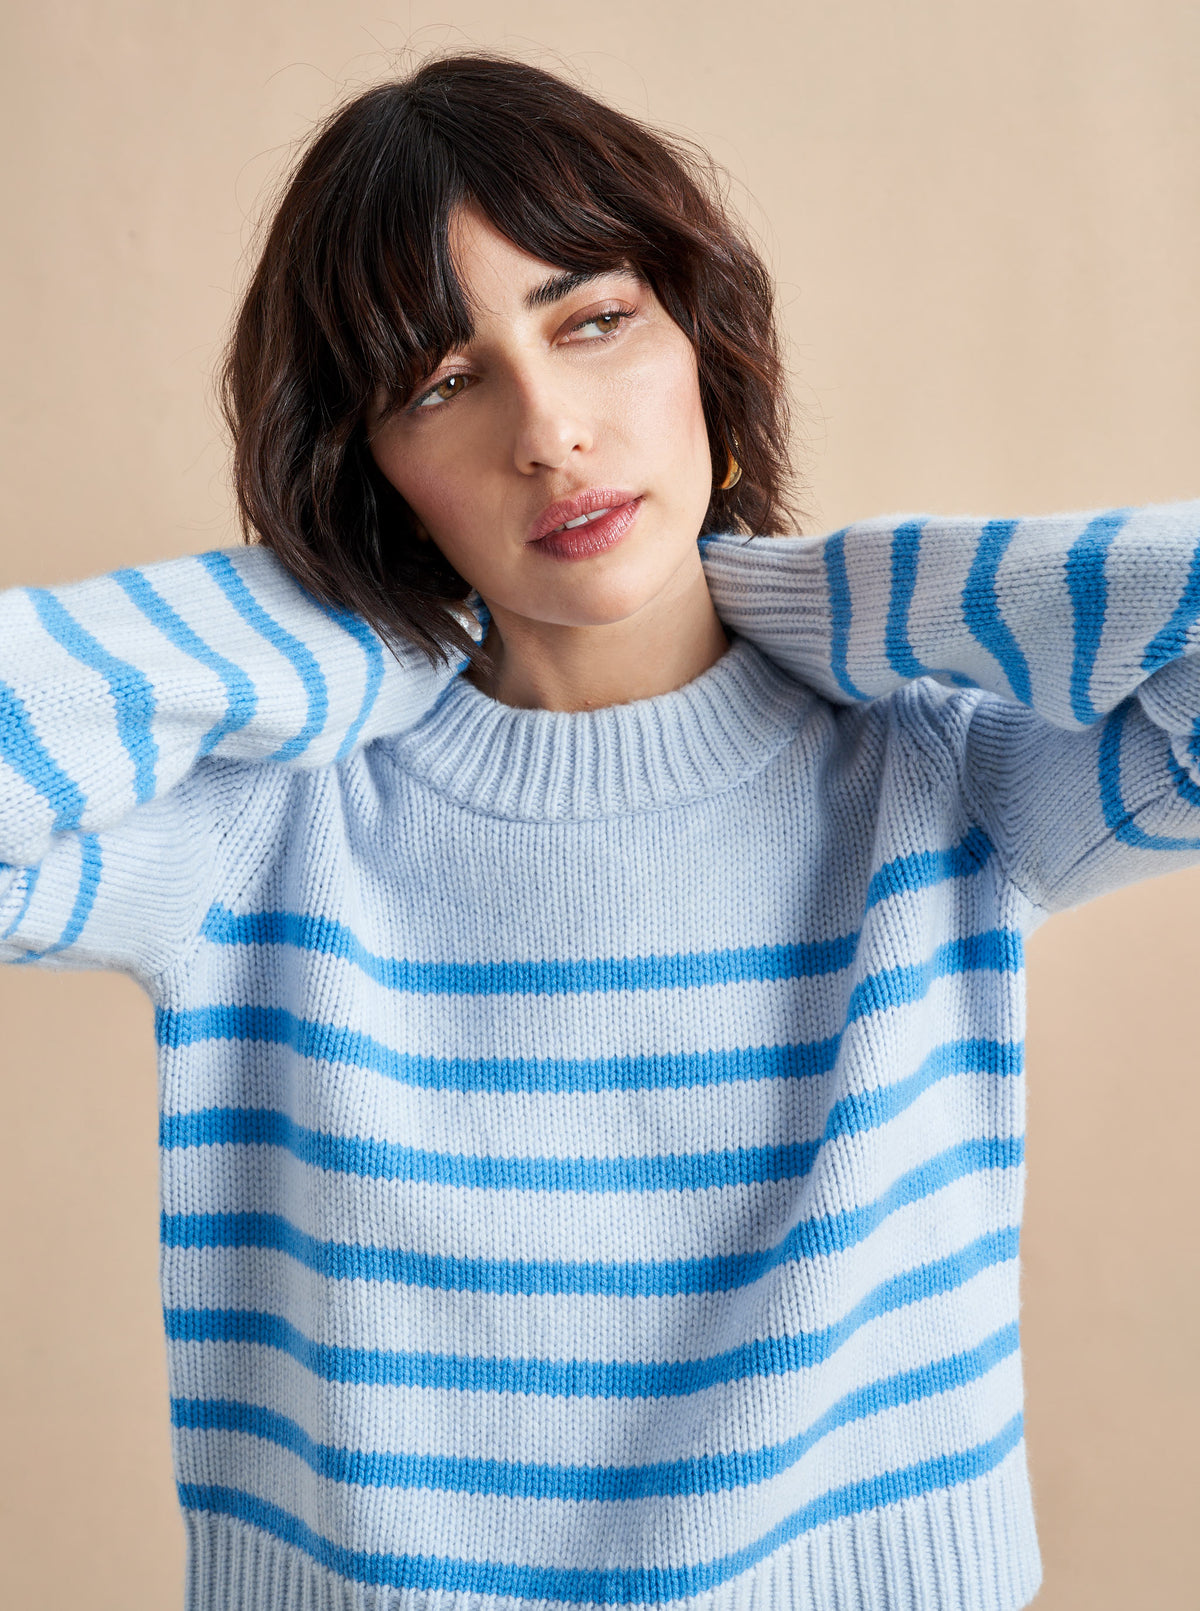 Get on board with our pale blue with tonal blue stripes, 7-ply wool-cashmere sweater, shrunken and slightly cropped, but as always, comfort and style not mutually exclusive.